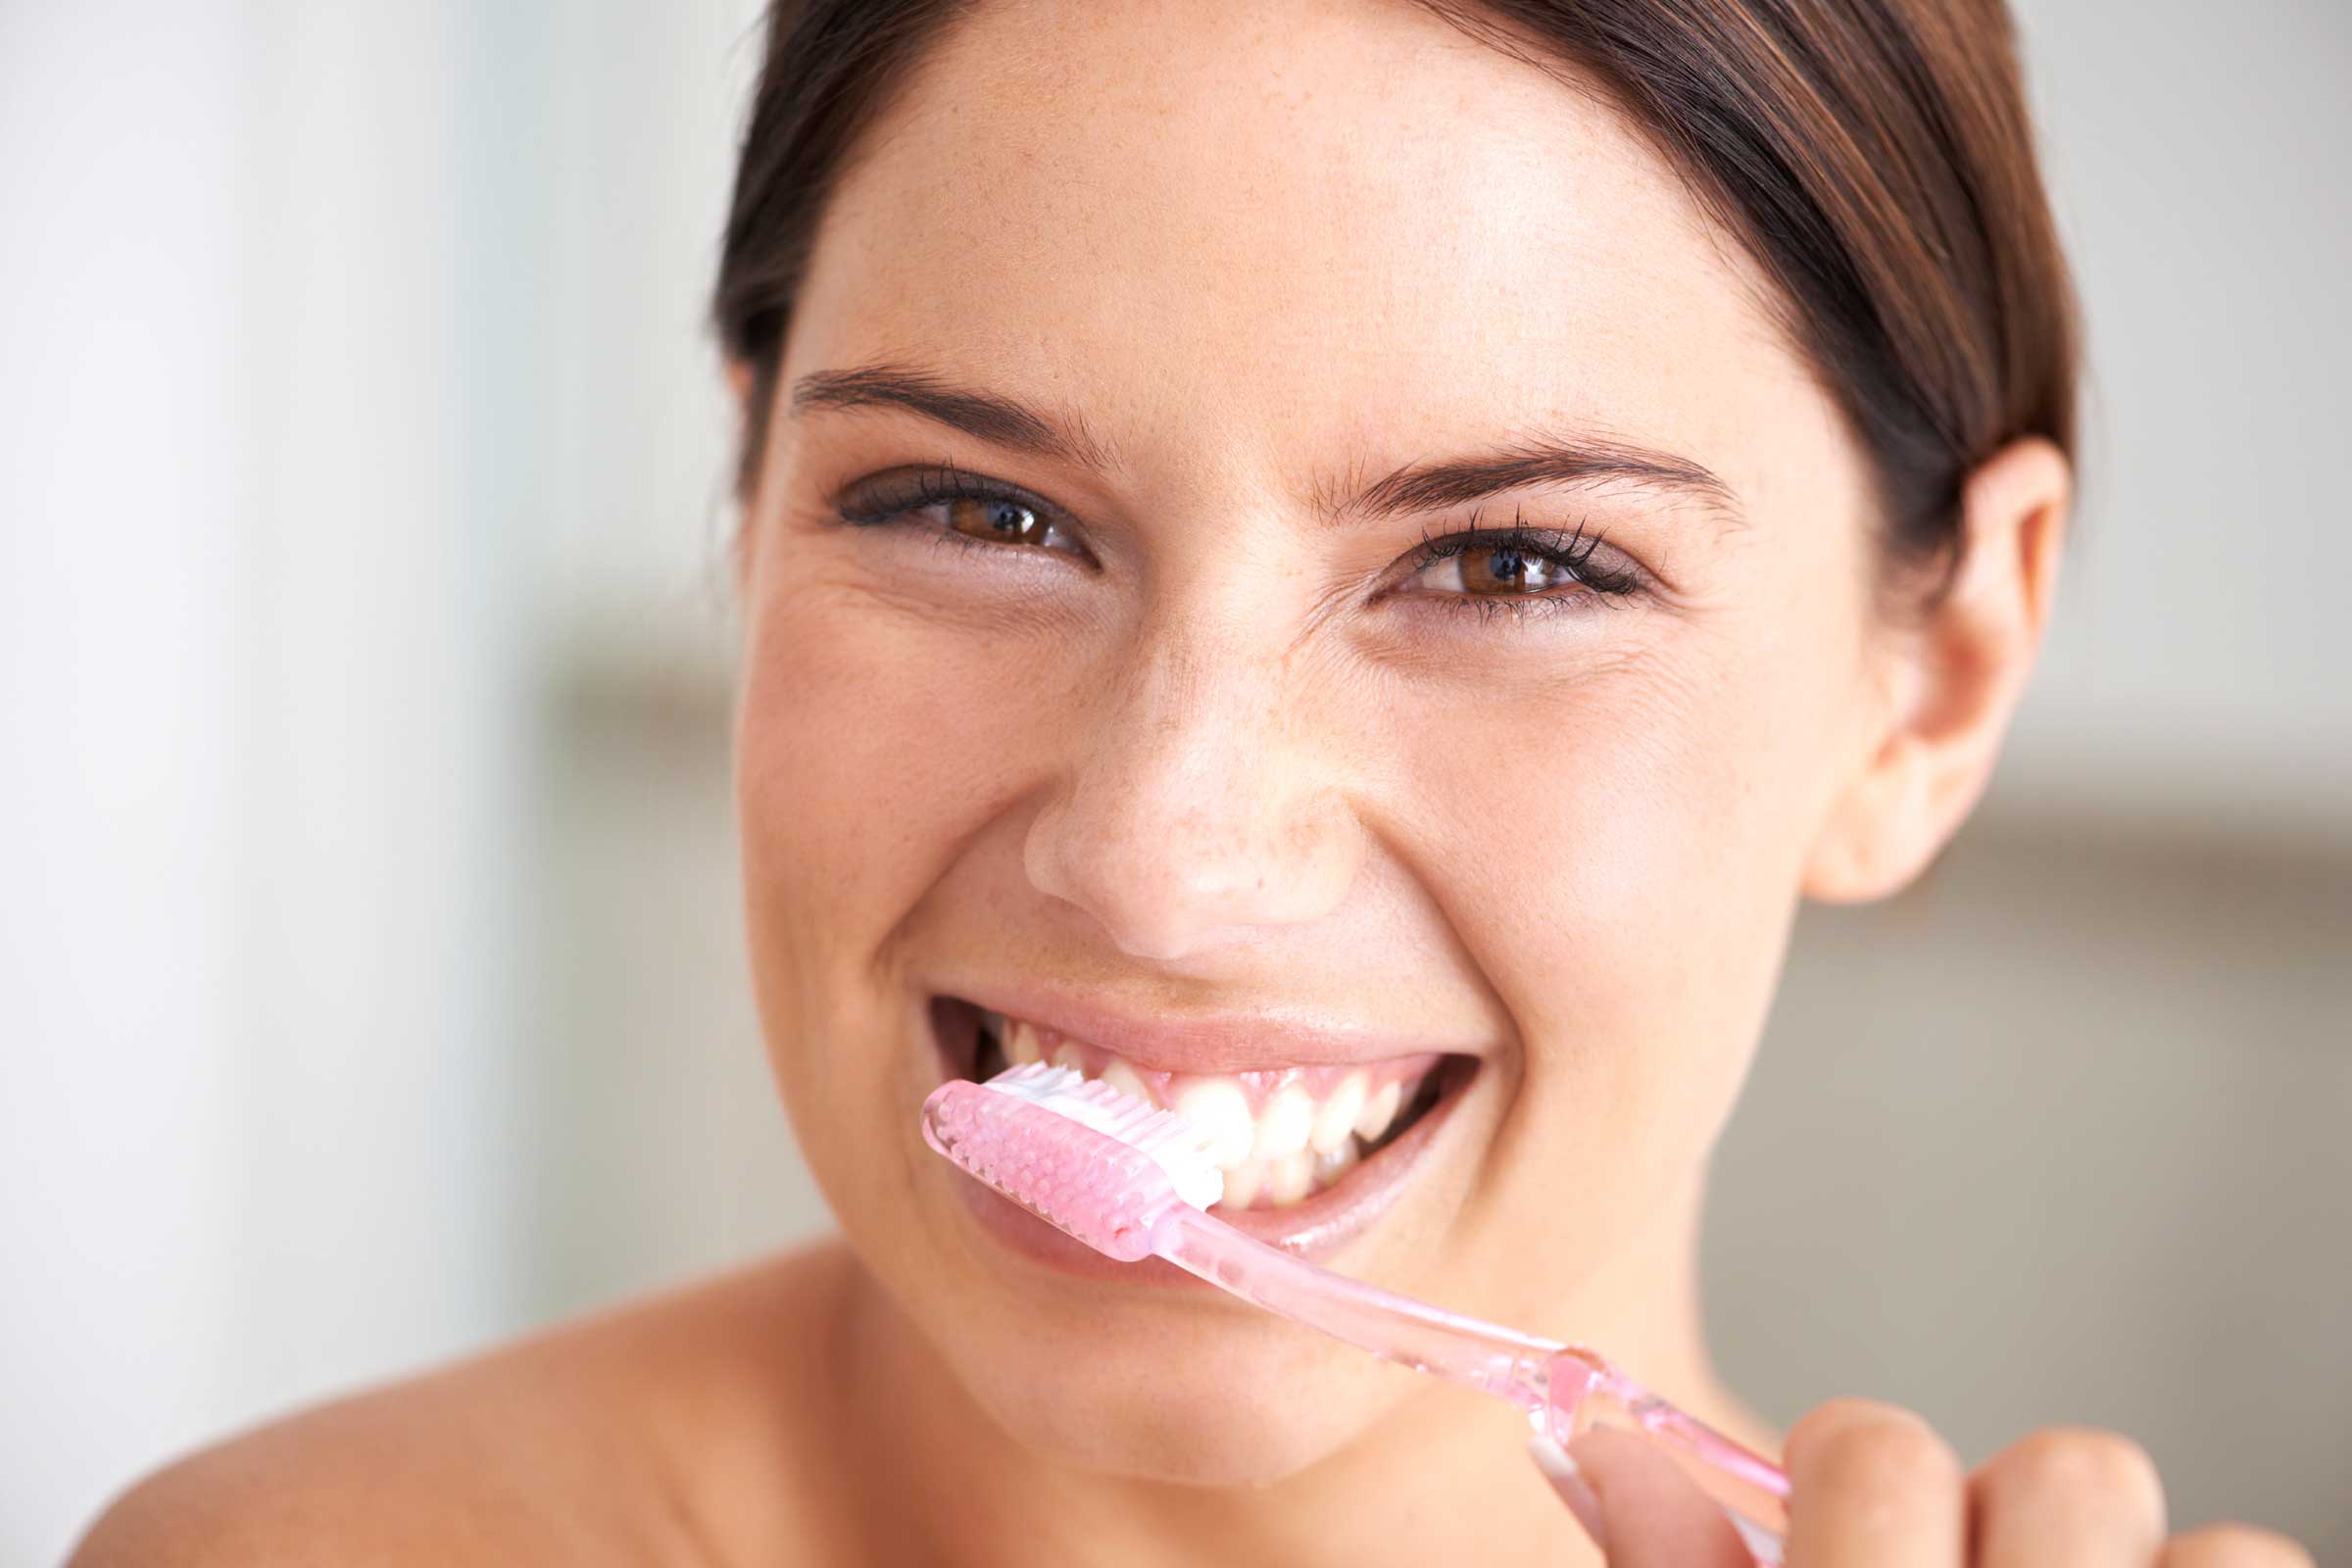 How to Brush Your Teeth: 8 Toothbrushing Mistakes | Reader's Digest